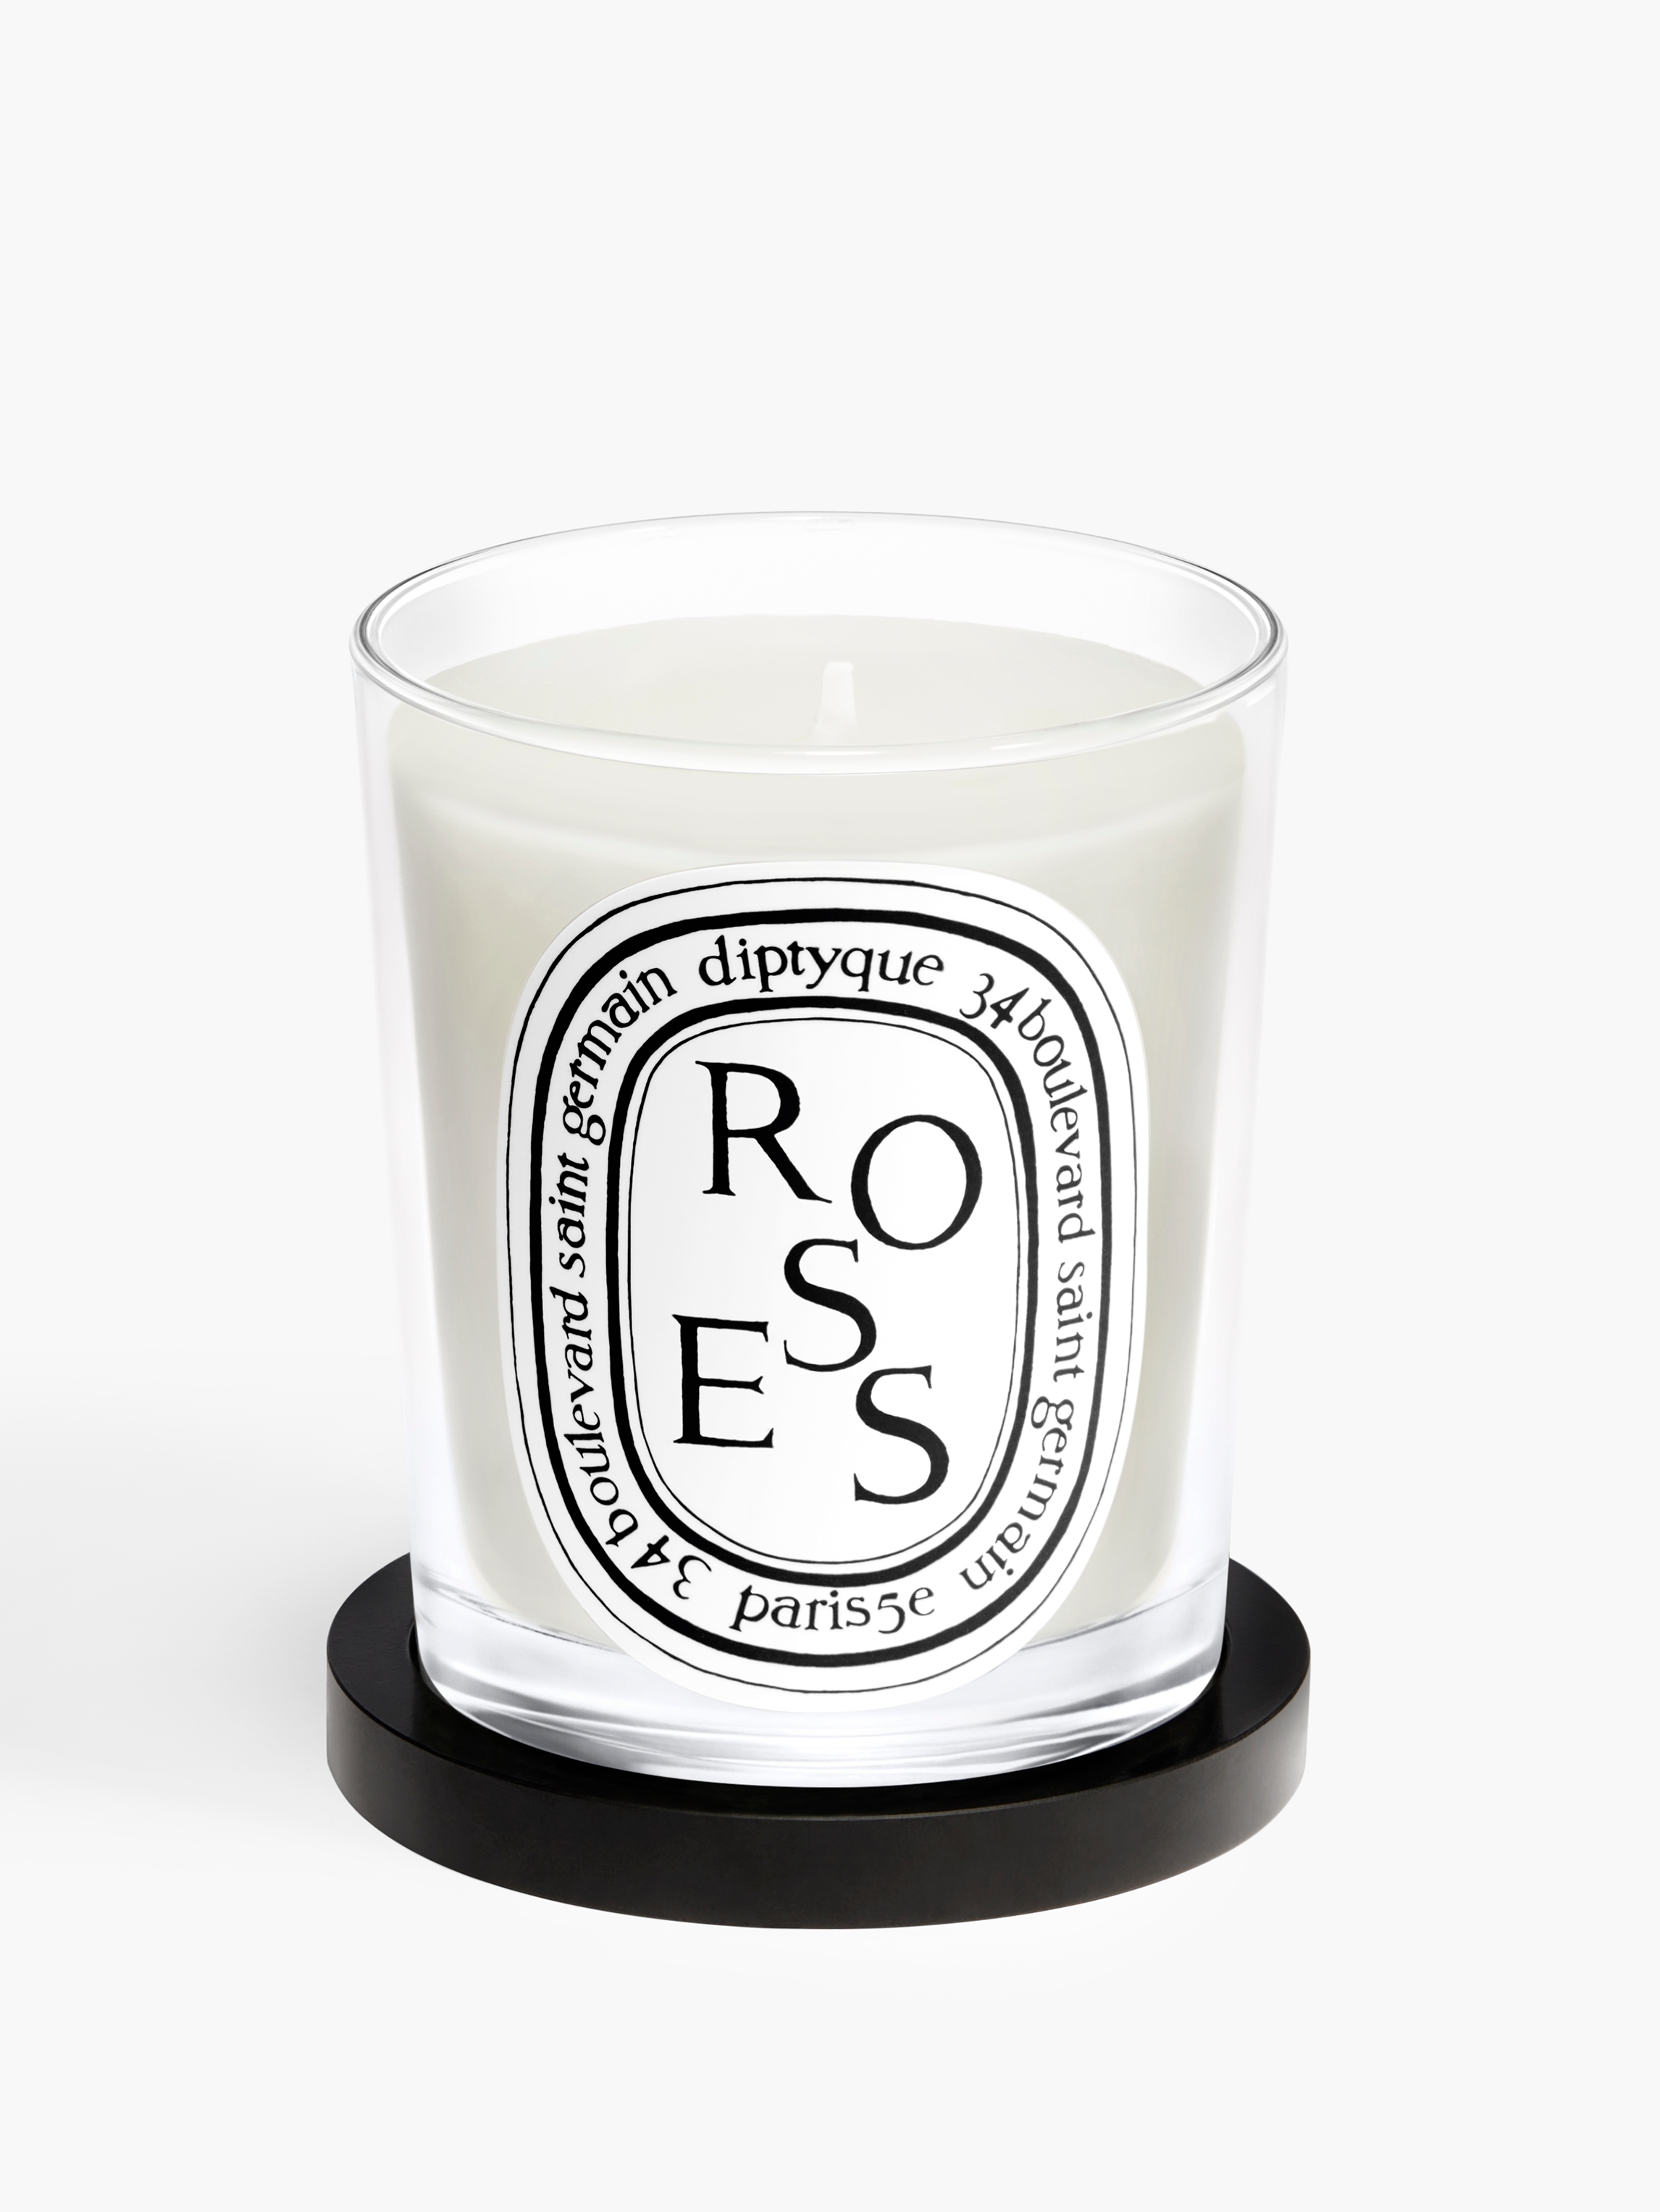 https://www.diptyqueparis.com/media/catalog/product/d/i/diptyque-black-stand-for-candle-190-g-soc-2.jpg?quality=100&bg-color=255,255,255&fit=bounds&height=&width=